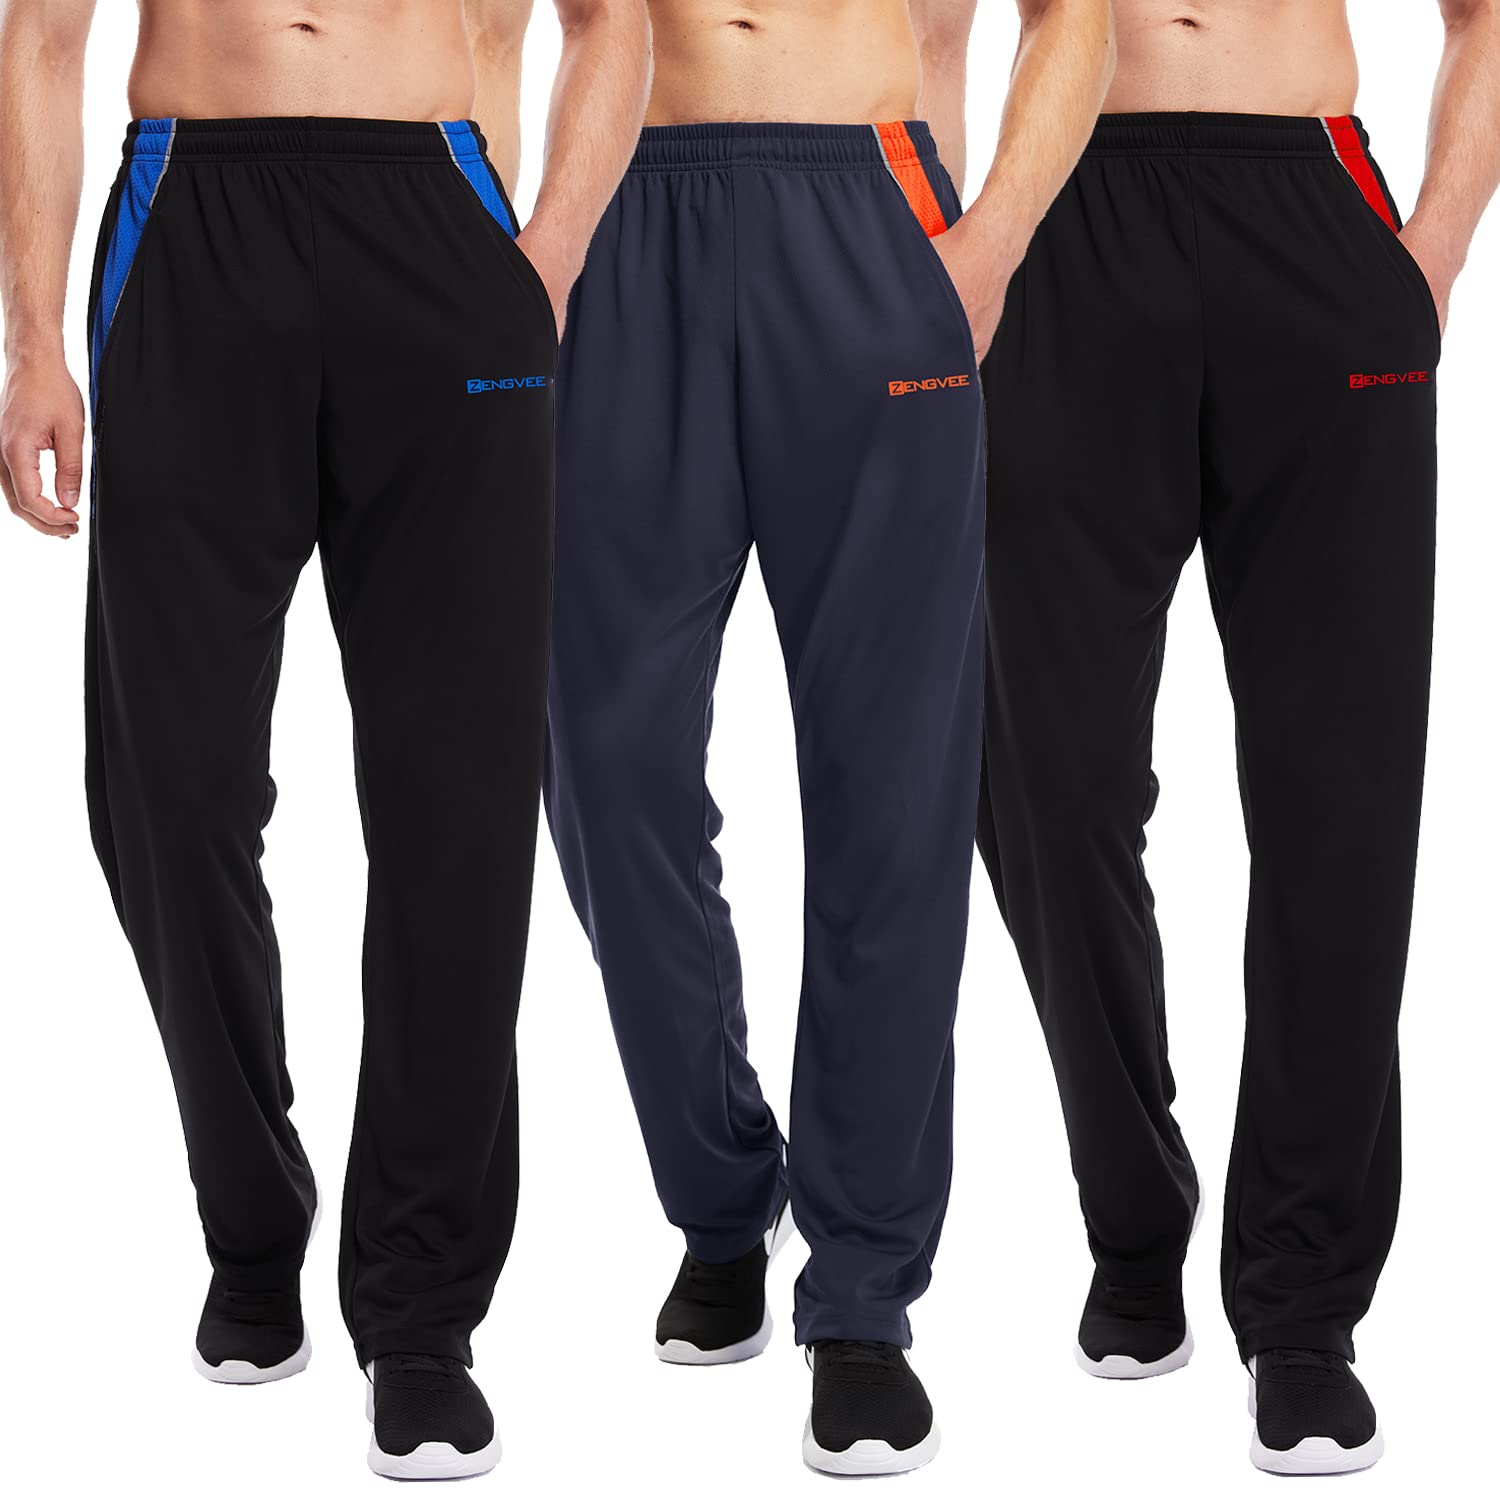 ZENGVEE 3 Pack Mens Polyester Sweatpants with Pockets Large 1 0430